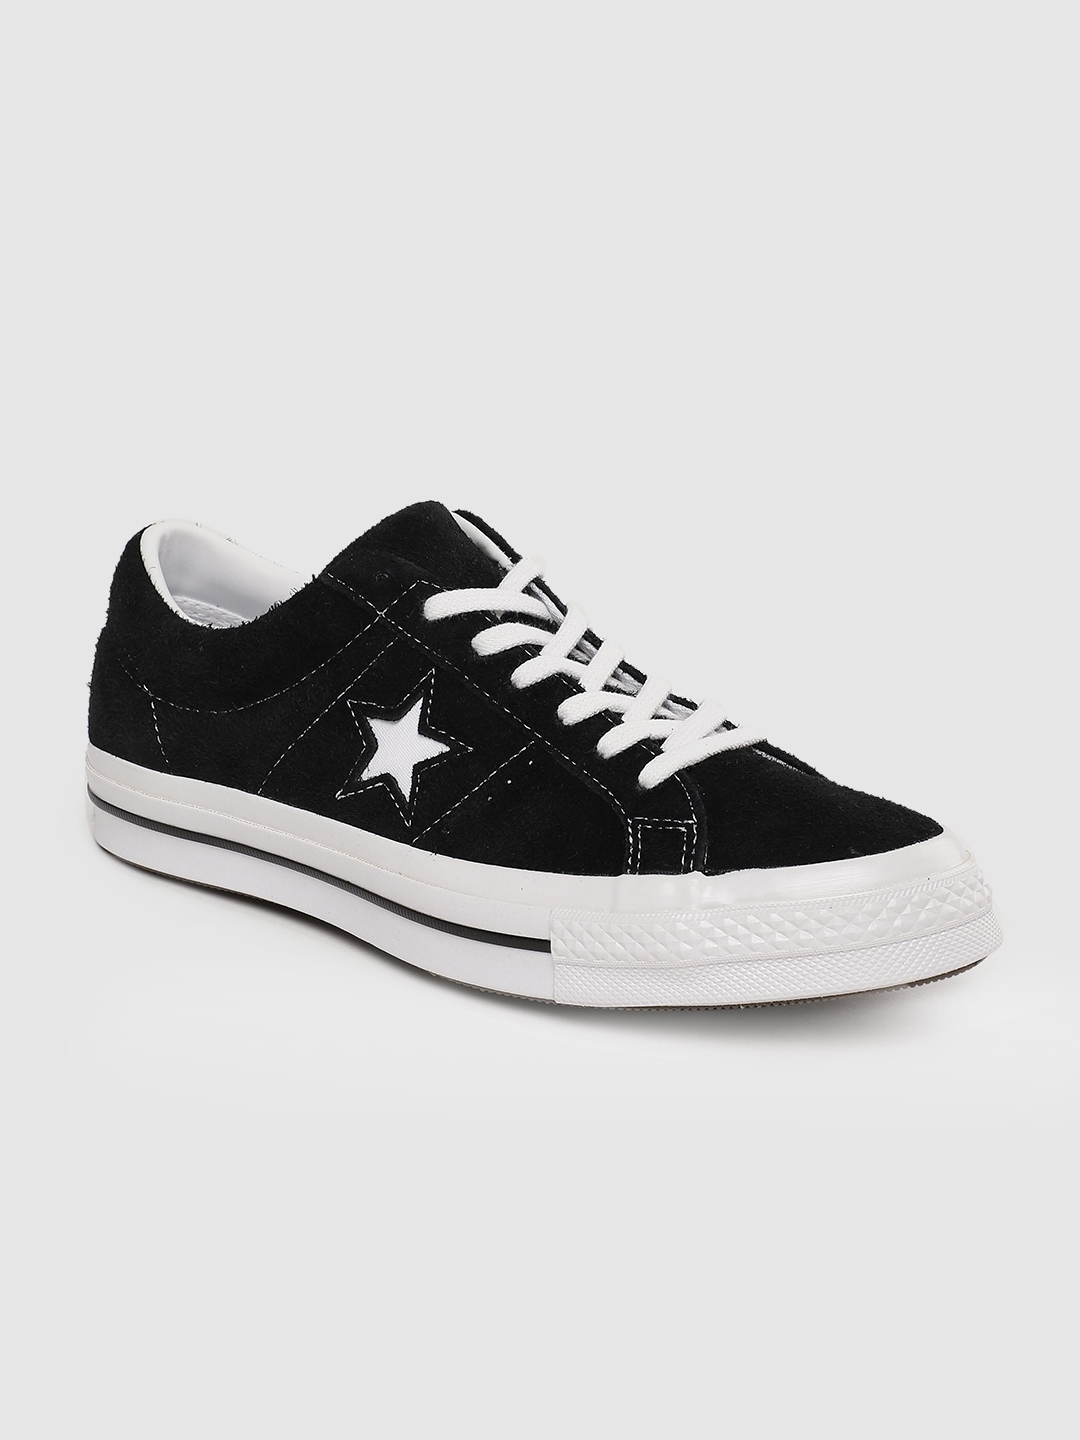 Converse One Star Pro Shoe Review & Wear Test - YouTube